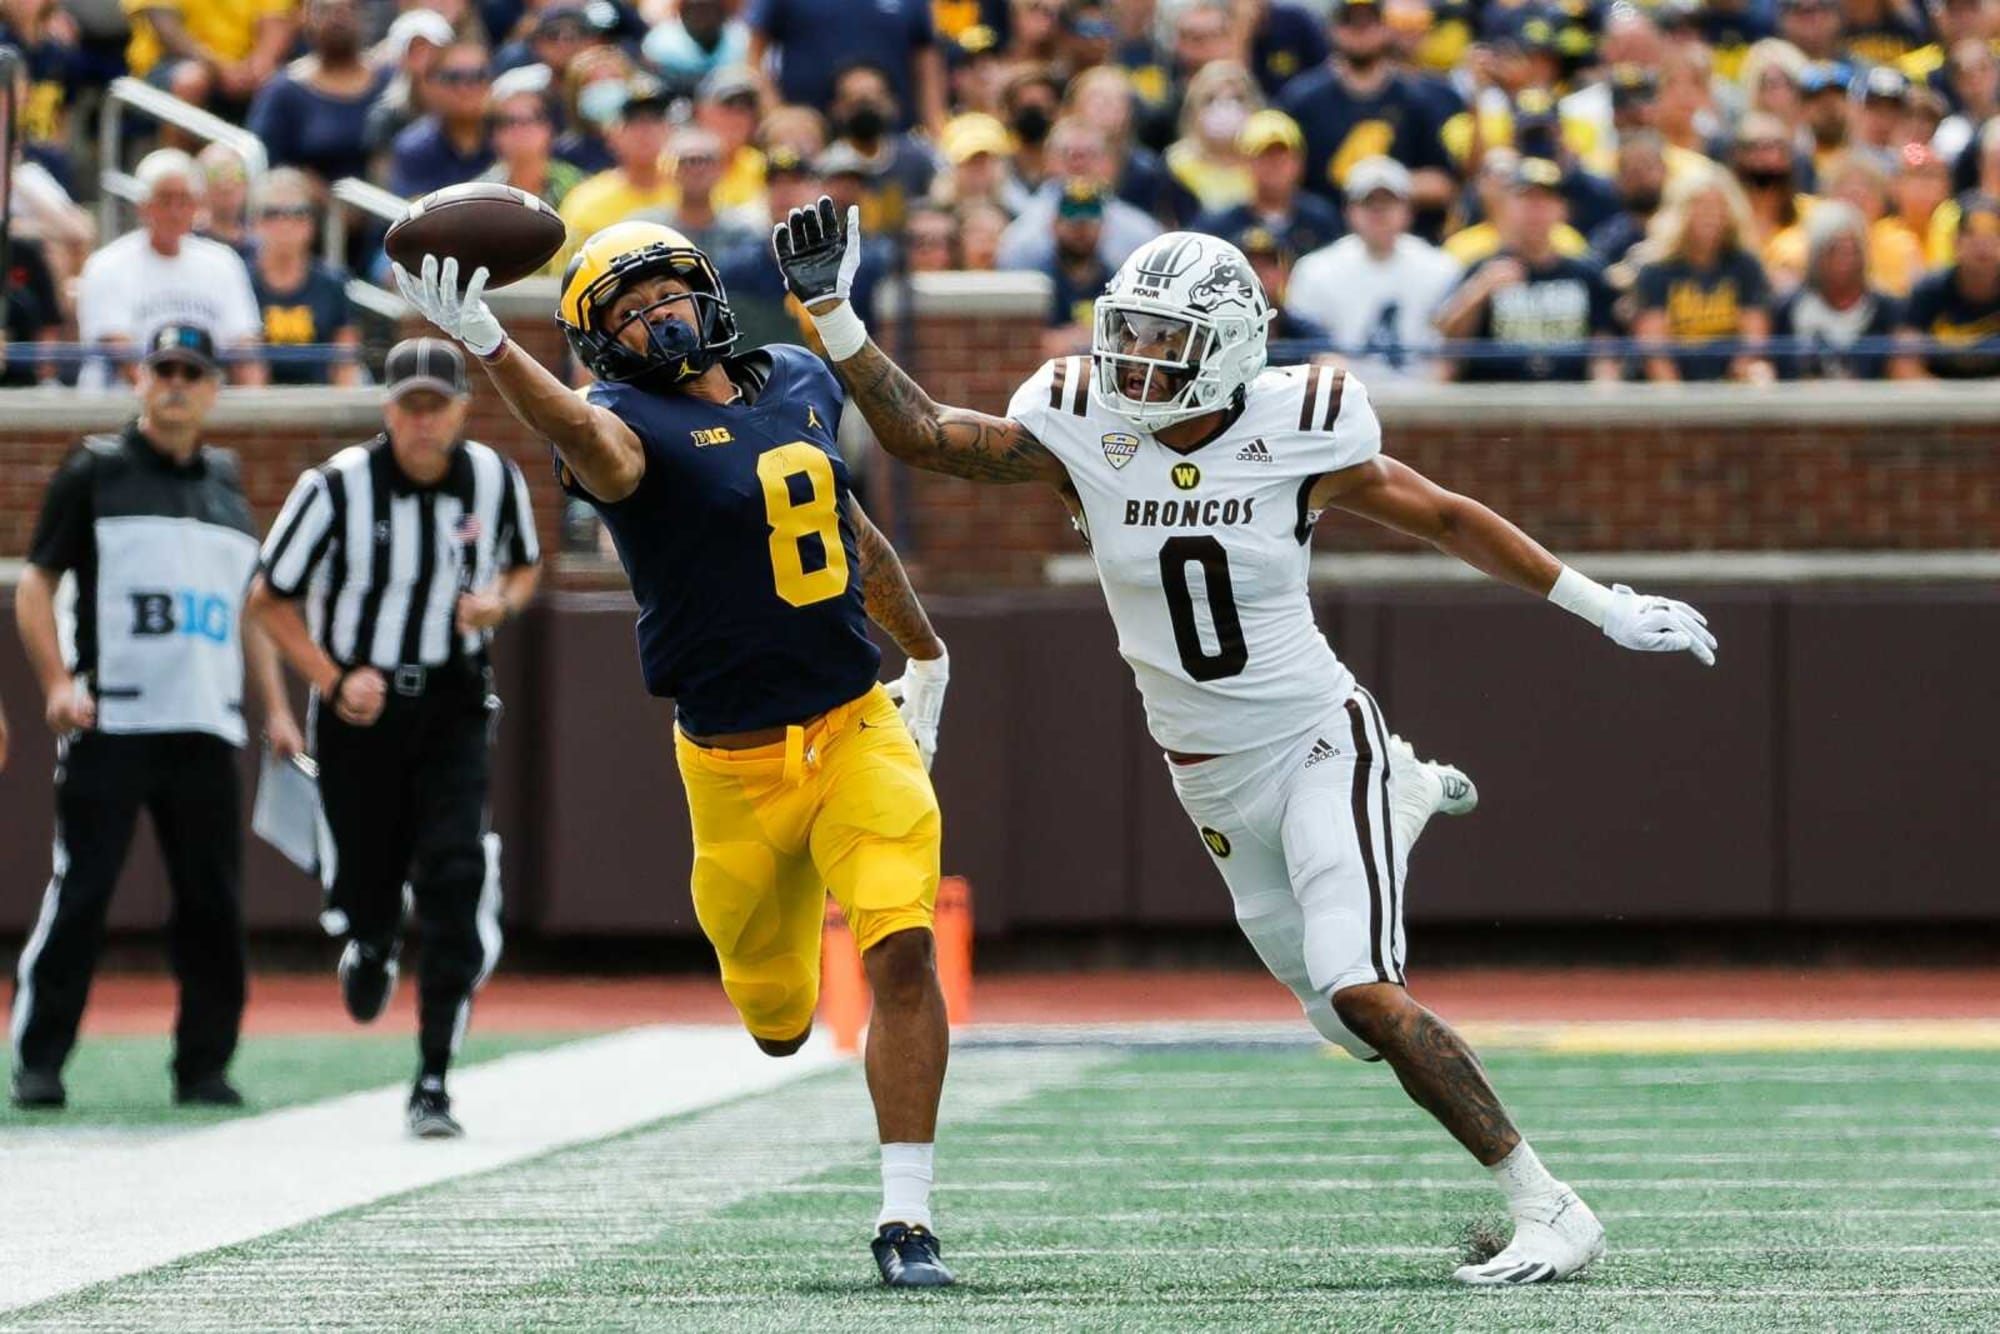 Michigan Football Who is Wolverines No. 1 wide receiver?